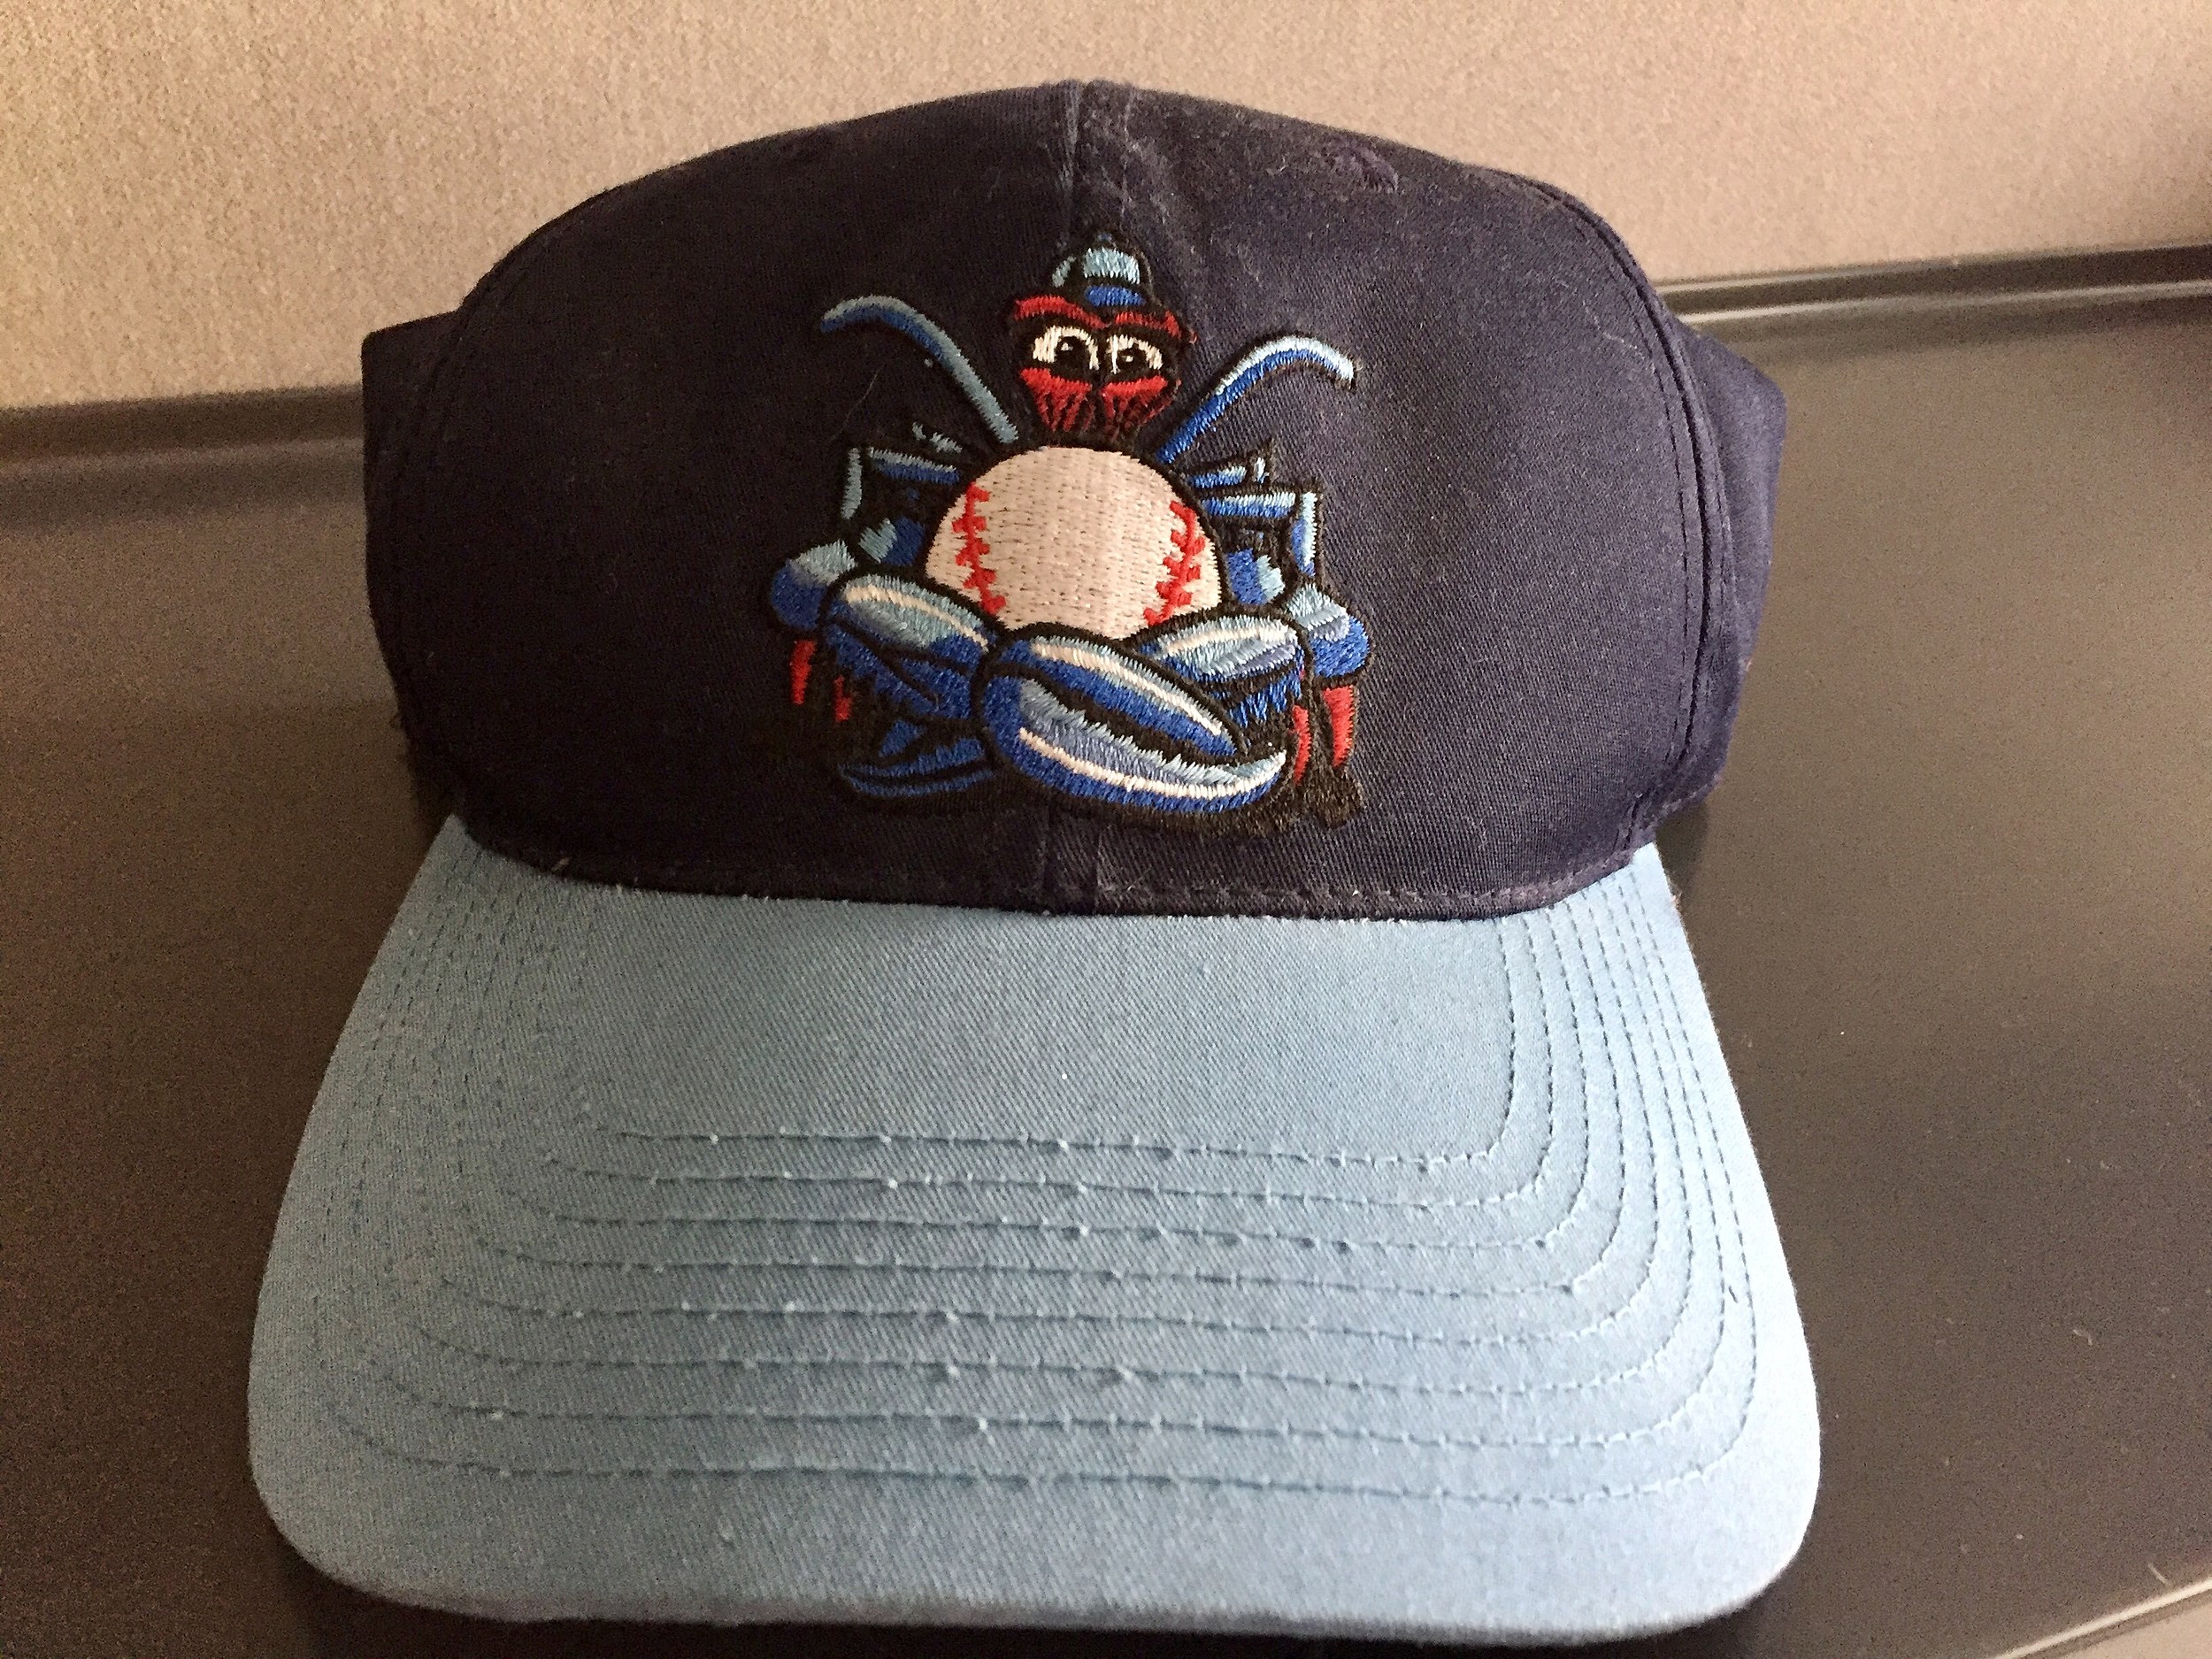 The Lakewood Blueclaws Cap